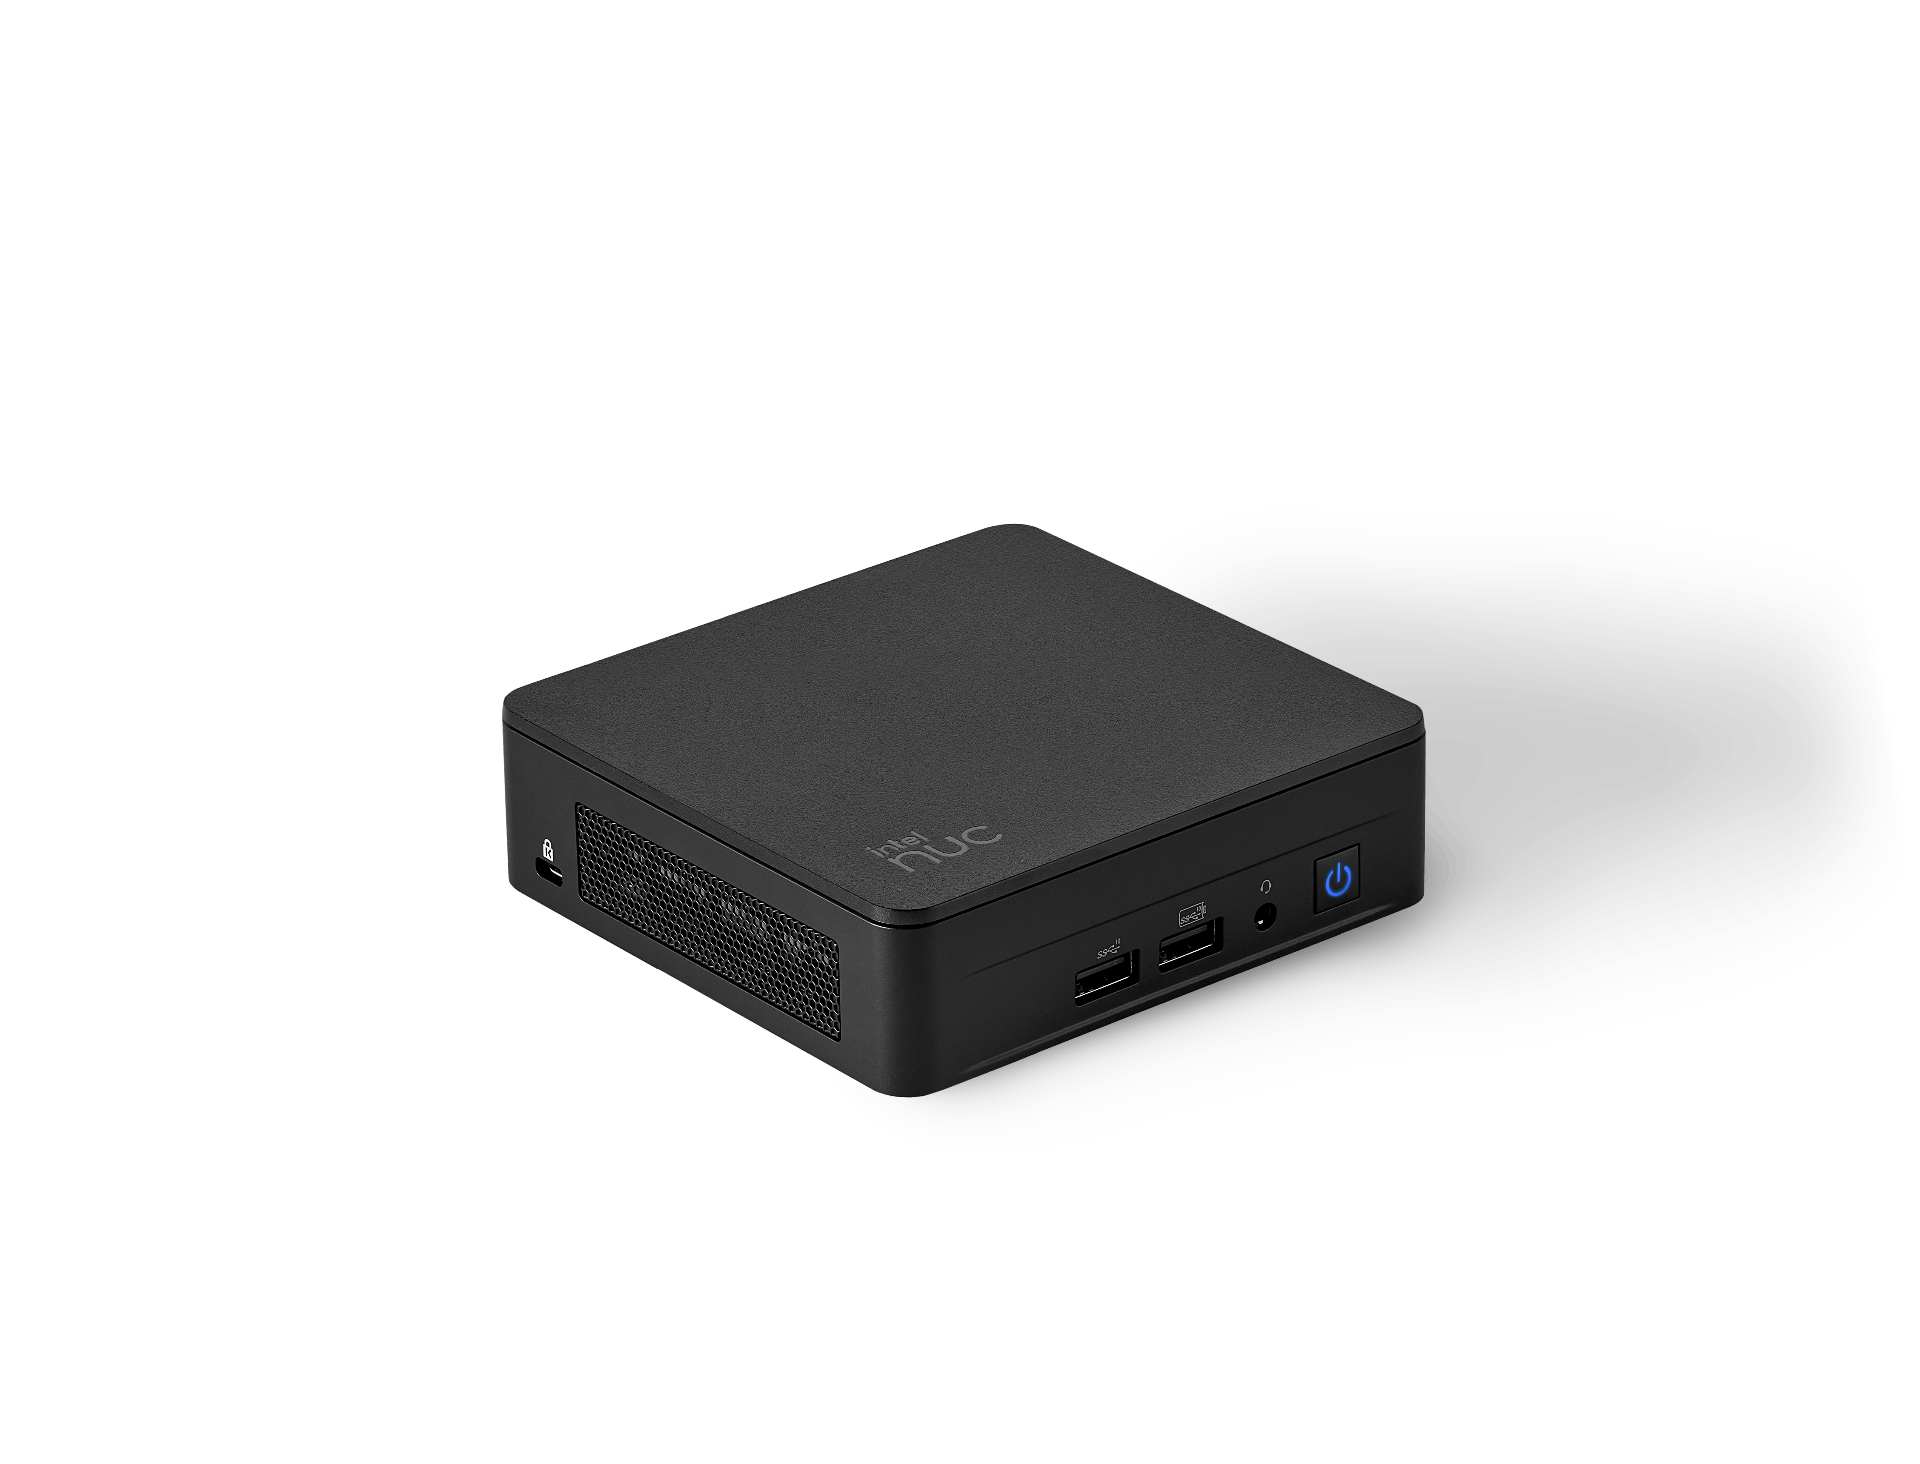  Mini PC Barebone: Intel 13th Gen. NUC, i7-1360P up to 5.00 GHz, 18MB Cache, DDR4(0/2), M.2 Drive, Wi-Fi 6E + Bluetooth, 2xHDMI/2xUSB-C <br><font color='red'>(NO POWER CABLE, optional CB PW 3P power cable)  